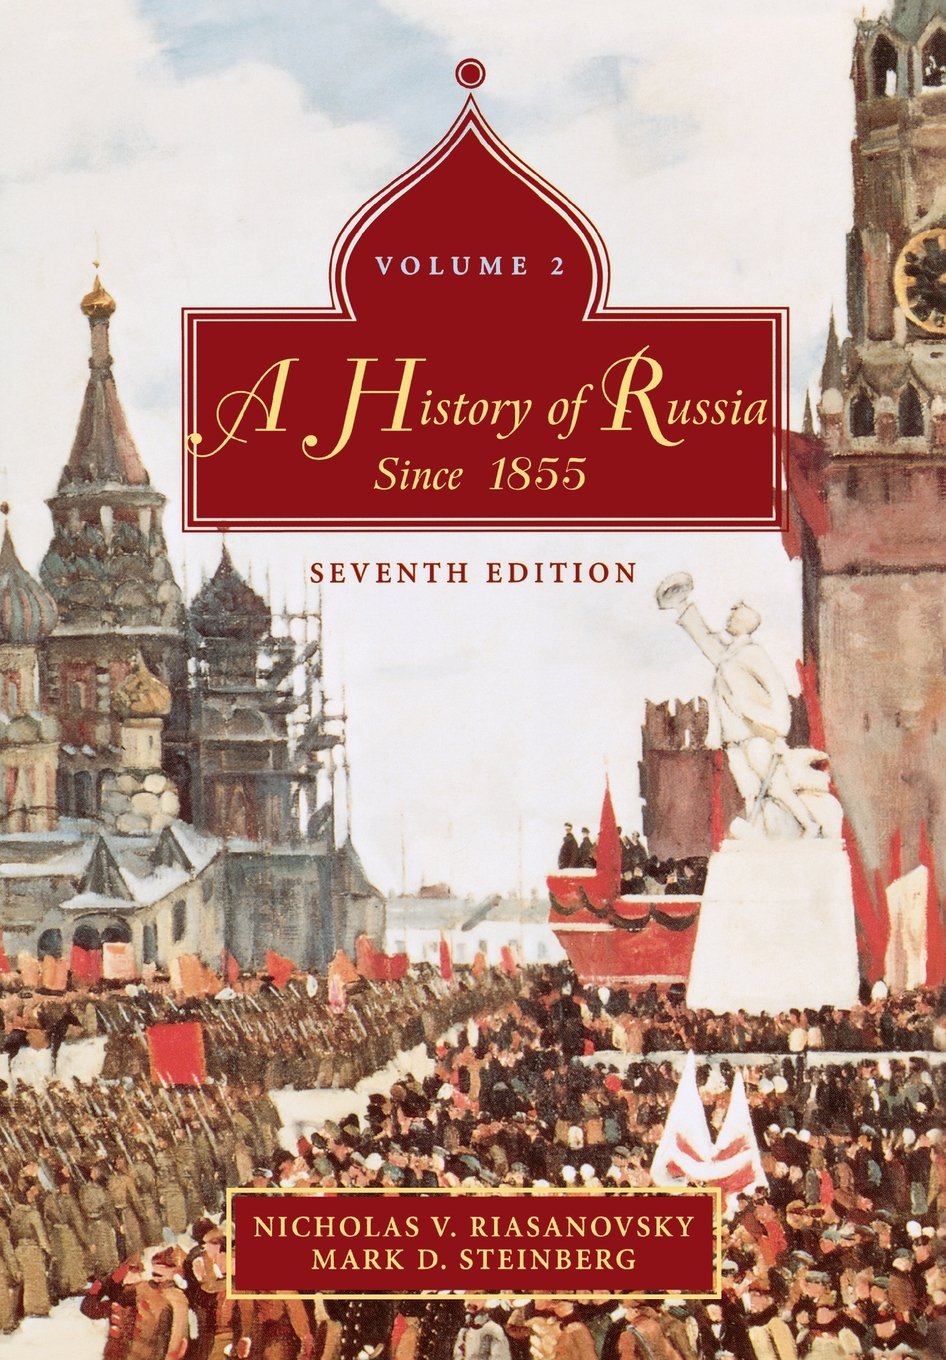 A History of Russia: Volume 2: Since 1855: Since 1855 v. 2